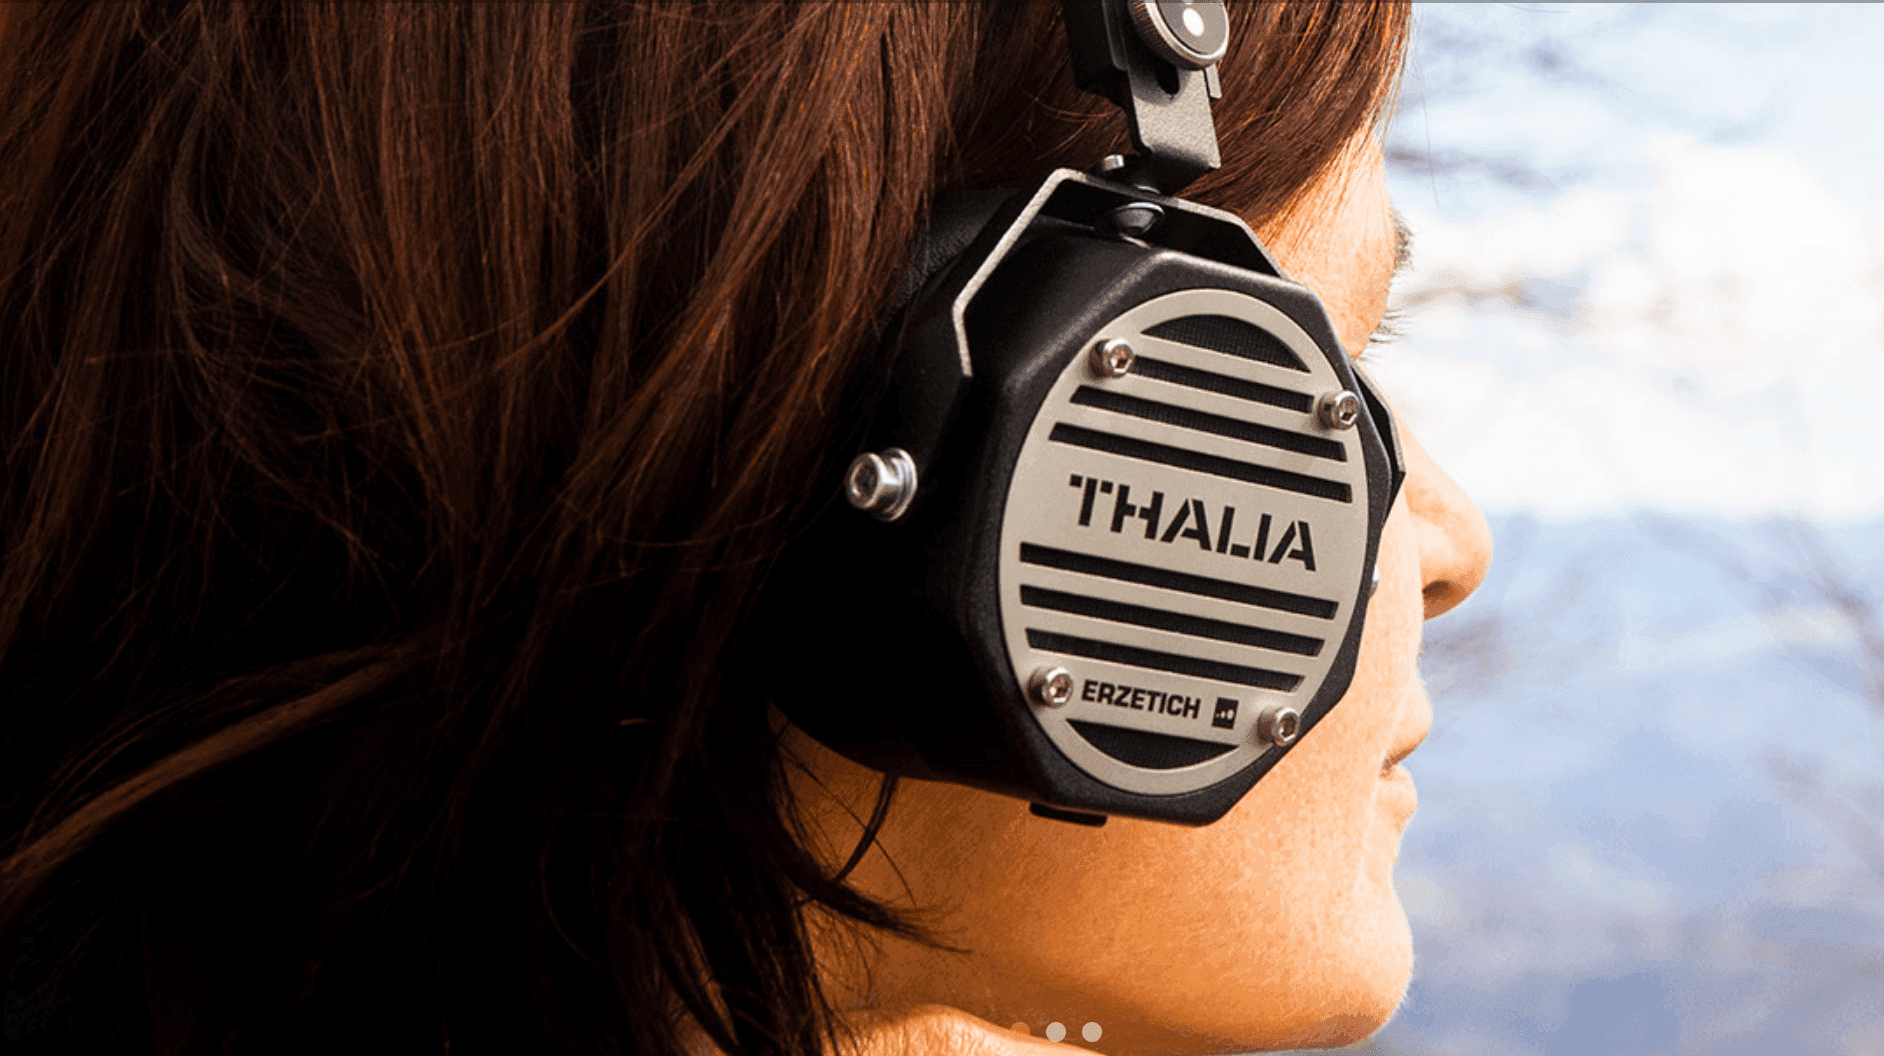  Erzetich Debuts Updated Headphones and Teases New Amplifier at Munich Audio Show